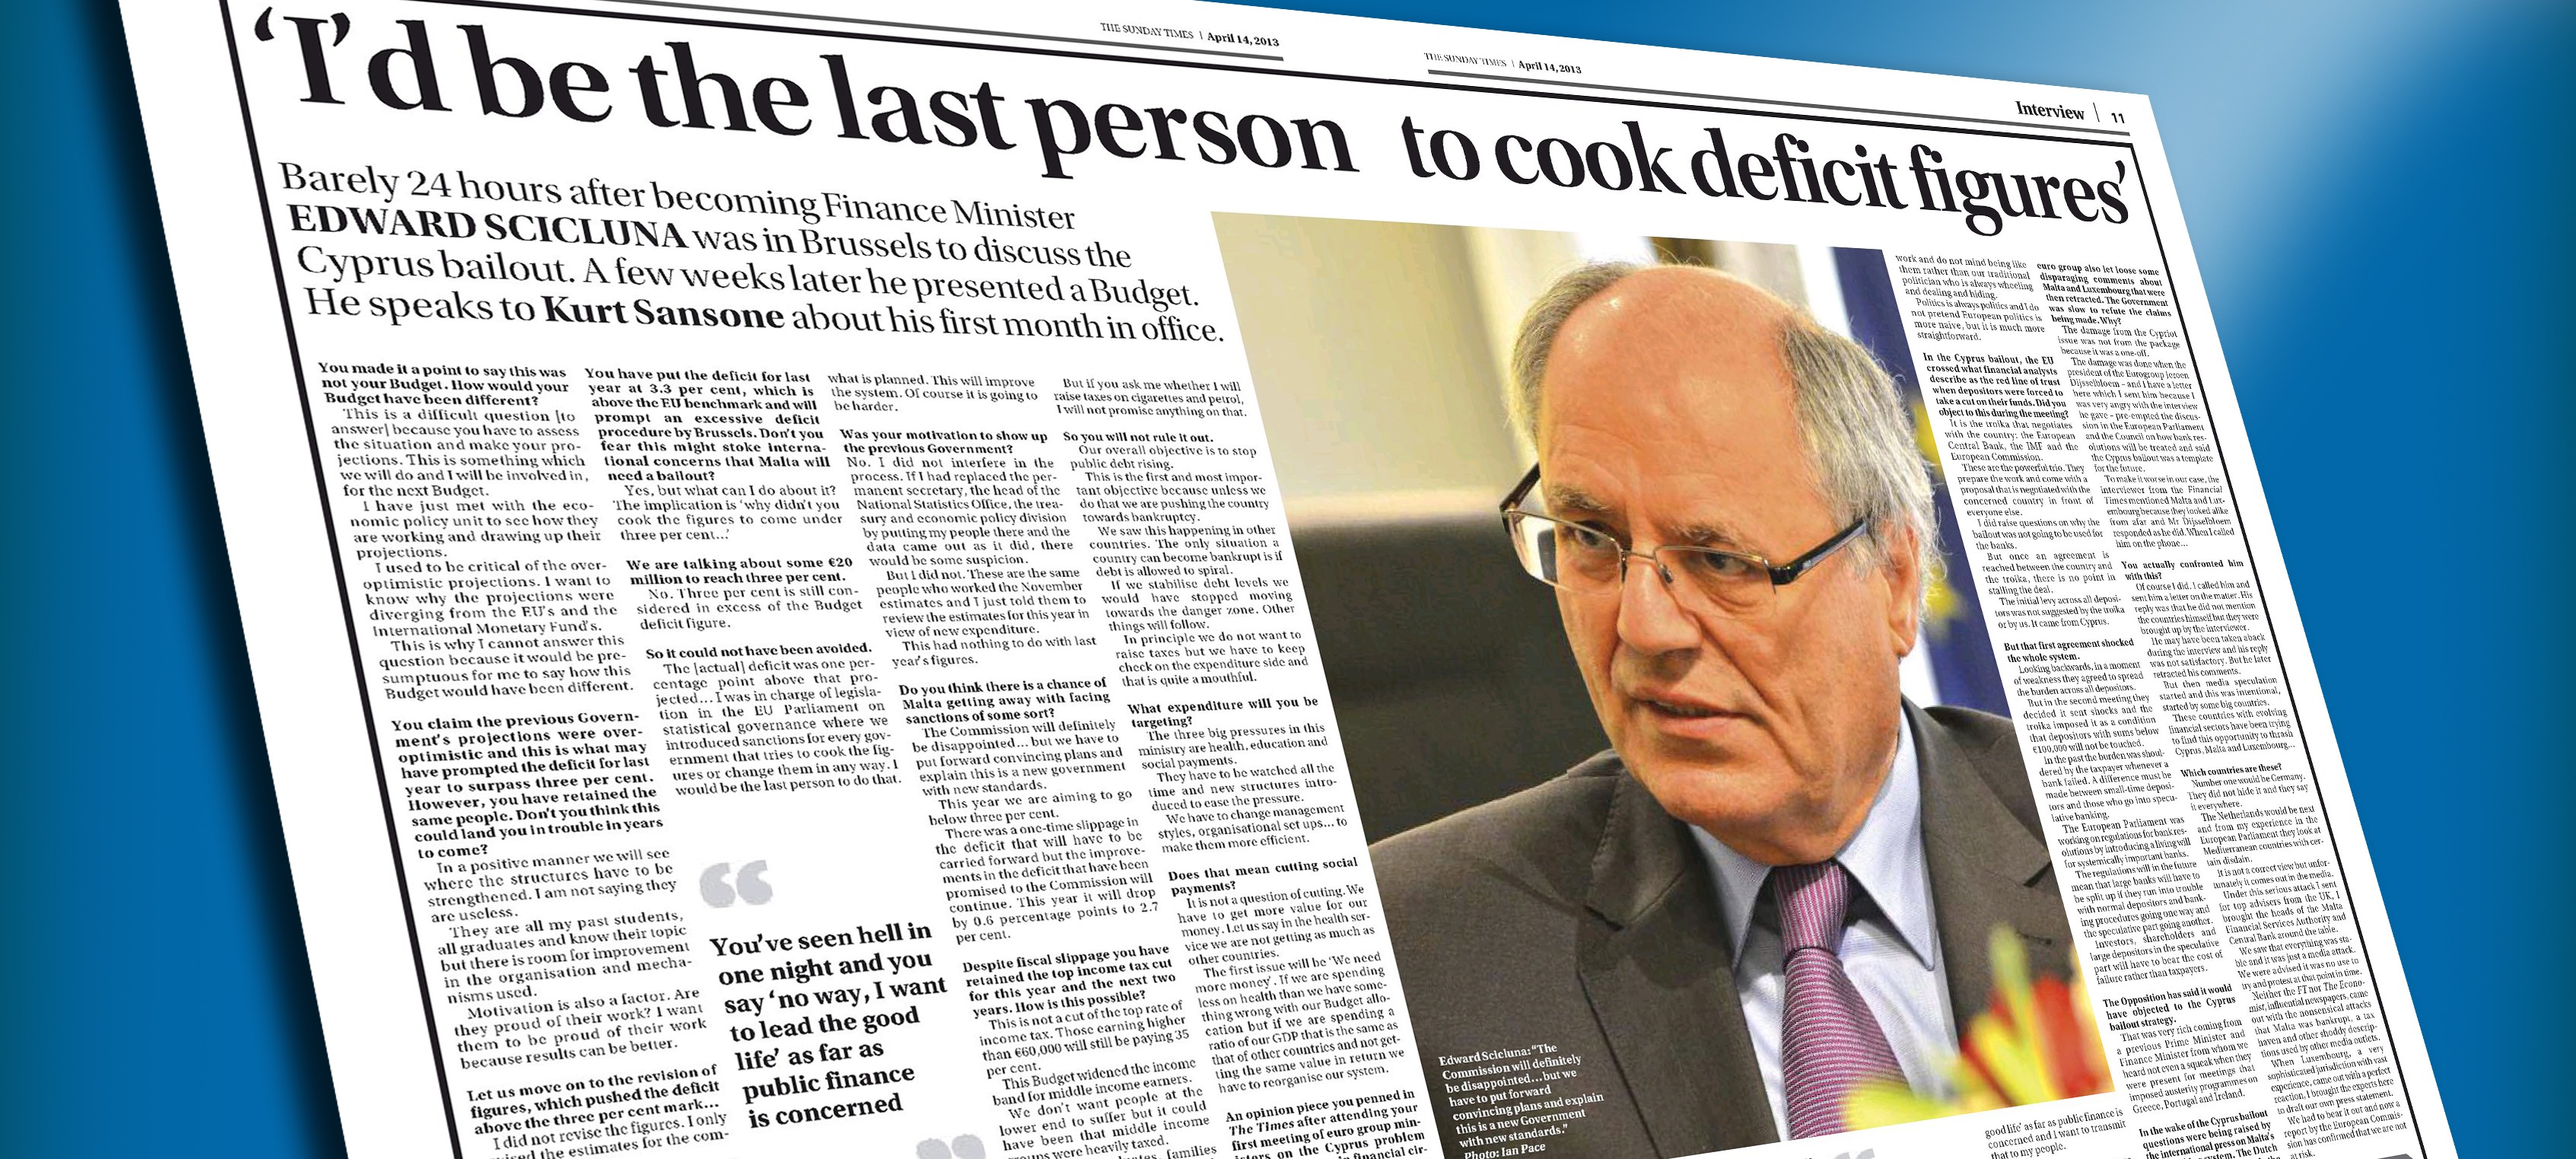 ‘I’d be the last person to cook deficit figures’